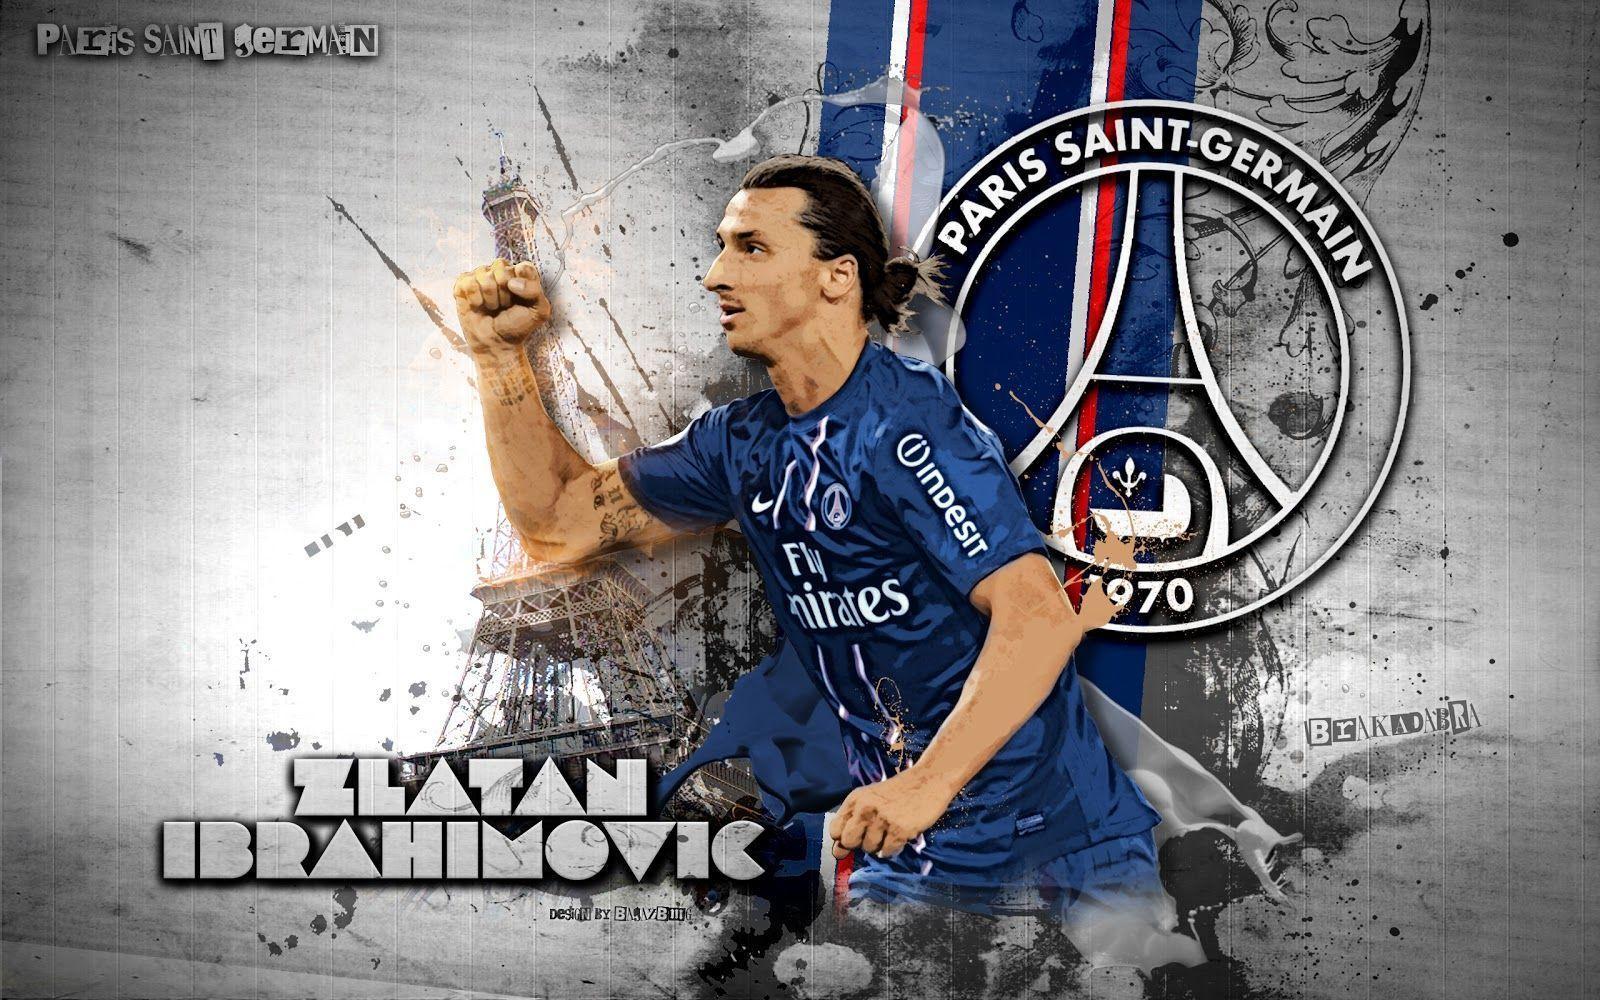 Zlatan Ibrahimovic Football Wallpaper, Background and Picture